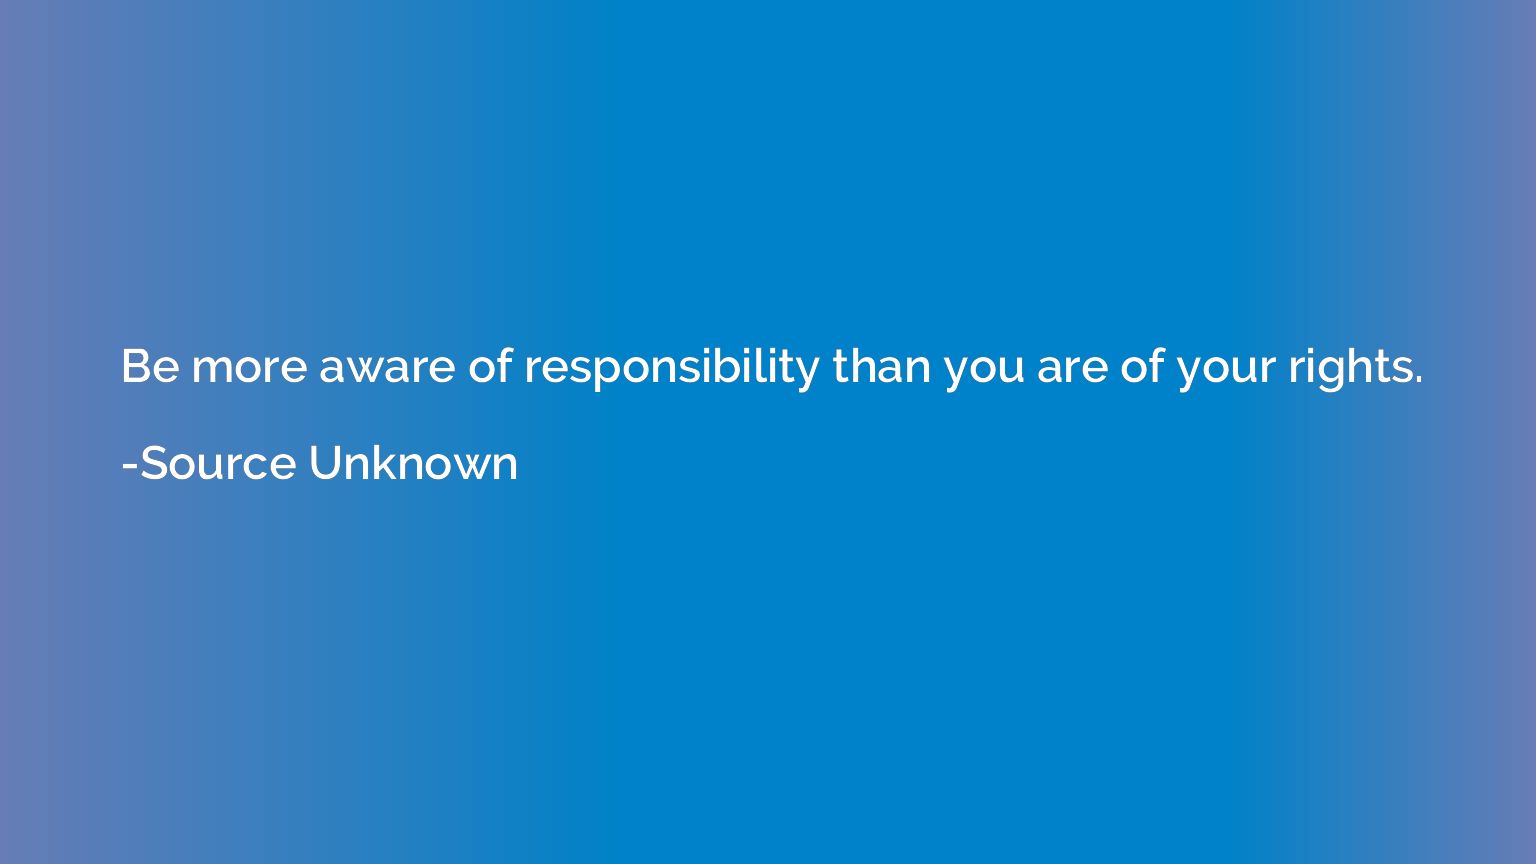 Be more aware of responsibility than you are of your rights.